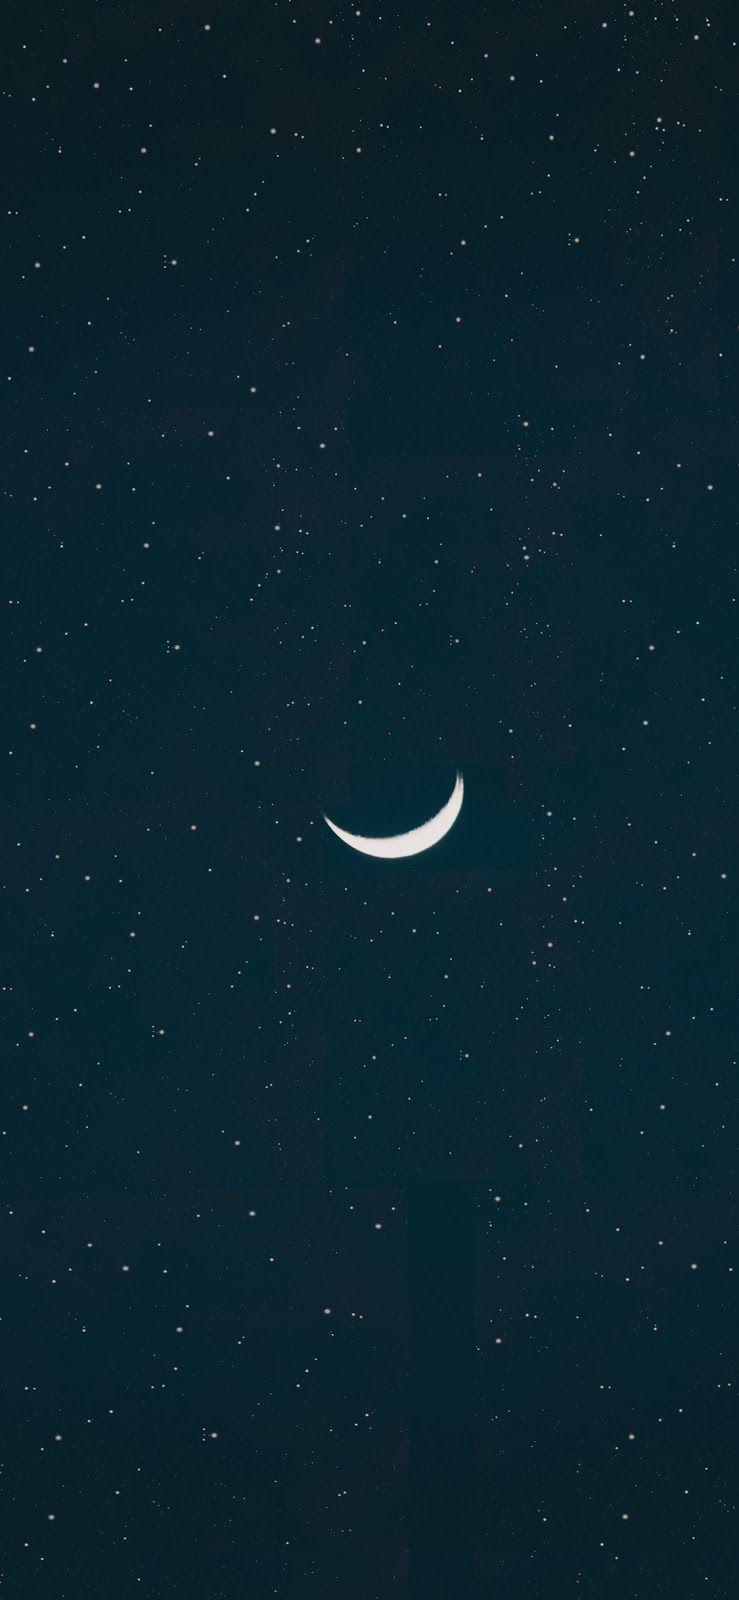 crescent moon wallpaper iphone x #wallpaper #iphone #android #background #followme. iPhone wallpaper moon, Space iphone wallpaper, Beautiful wallpaper